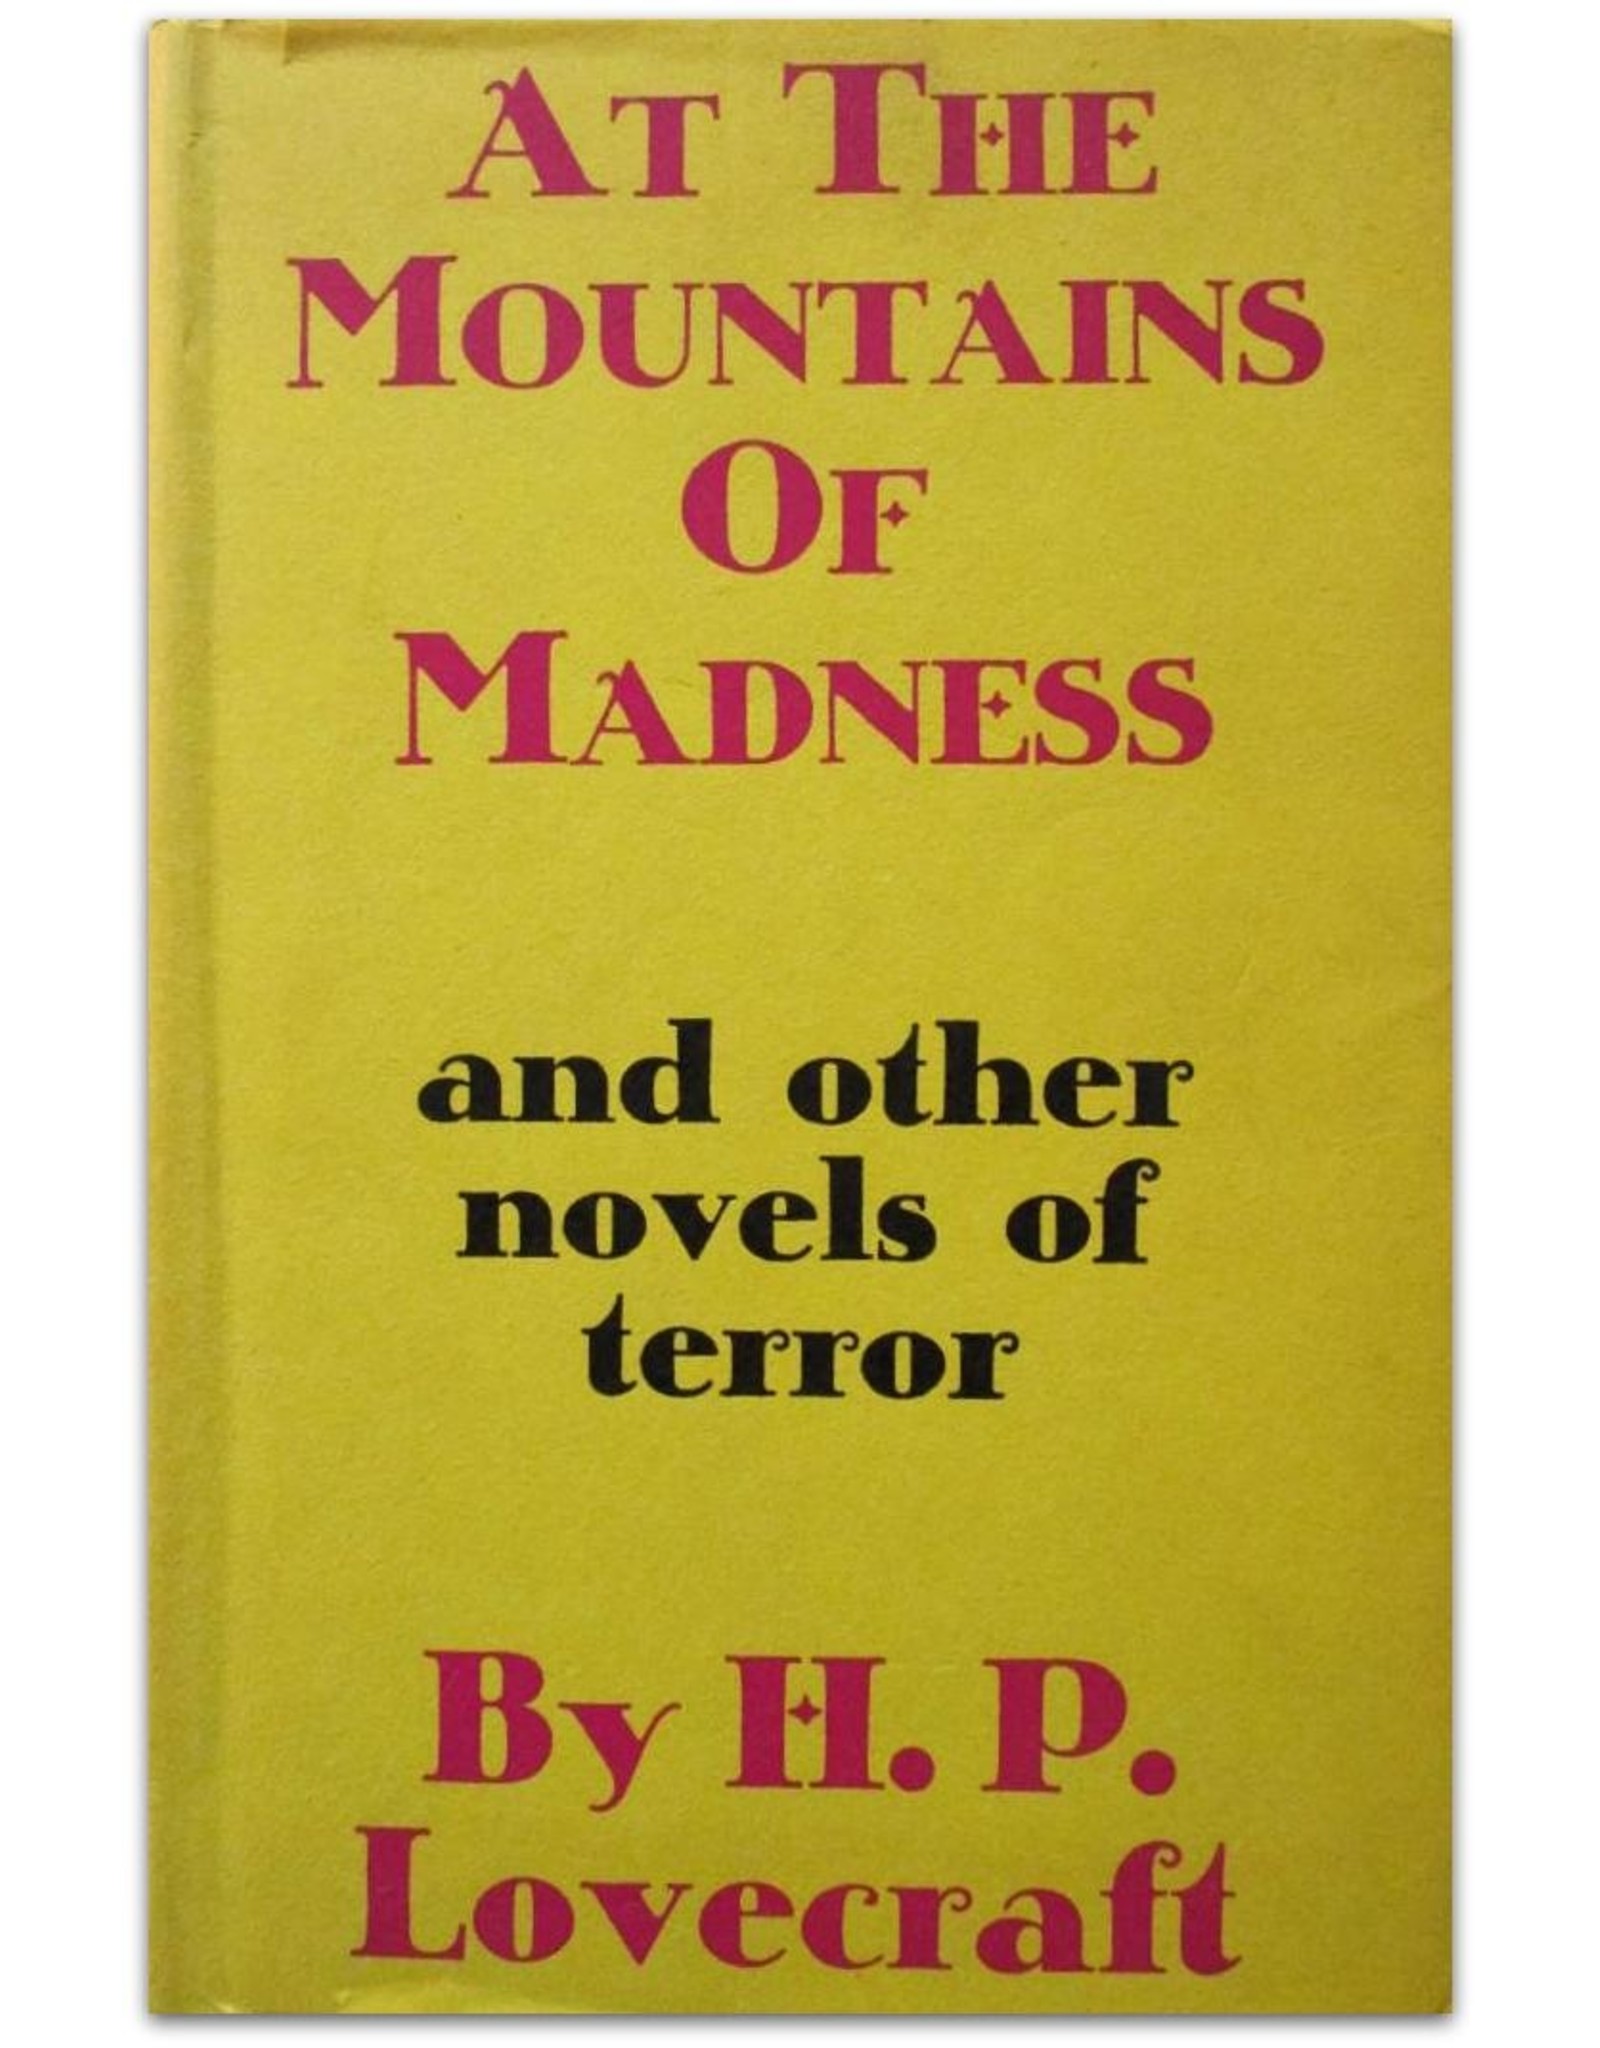 H.P. Lovecraft - At the Mountains of Madness And Other Novels of Terror